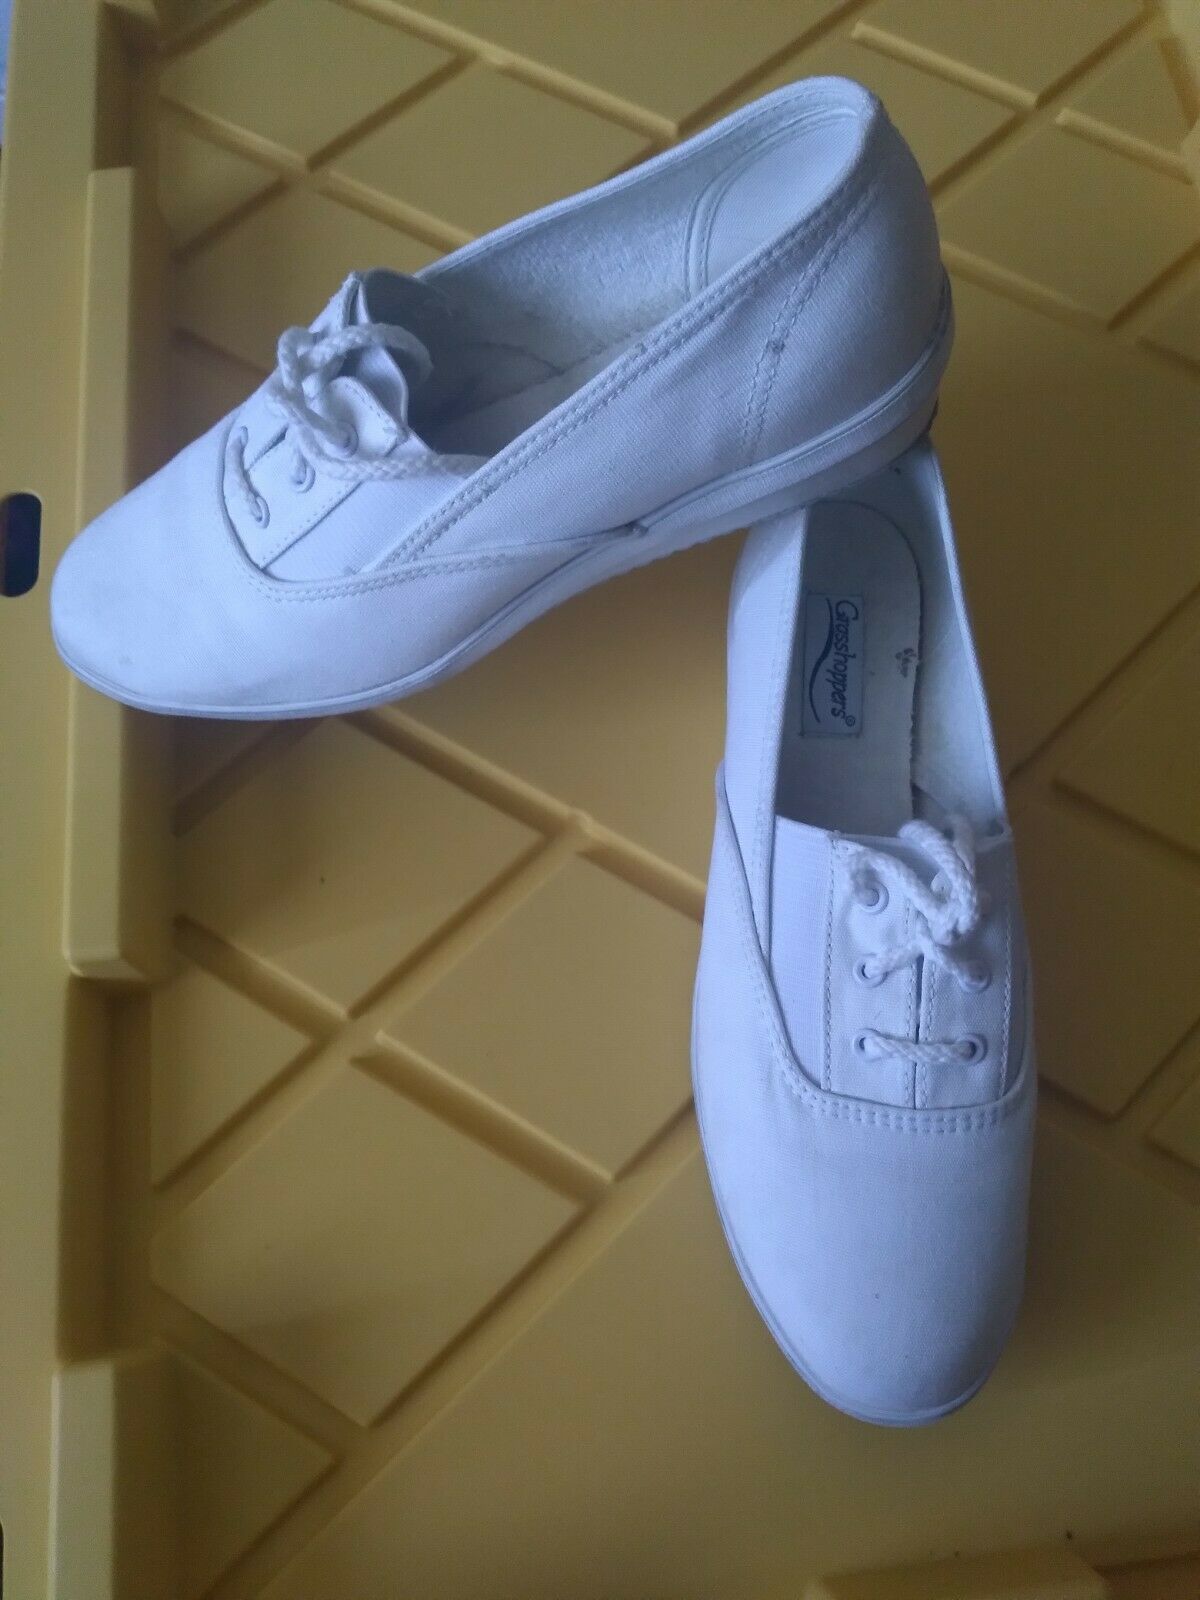 Women's Shoes Grasshoppers - All White Canvas with Slight Heel SZ 9 - ON SALE!